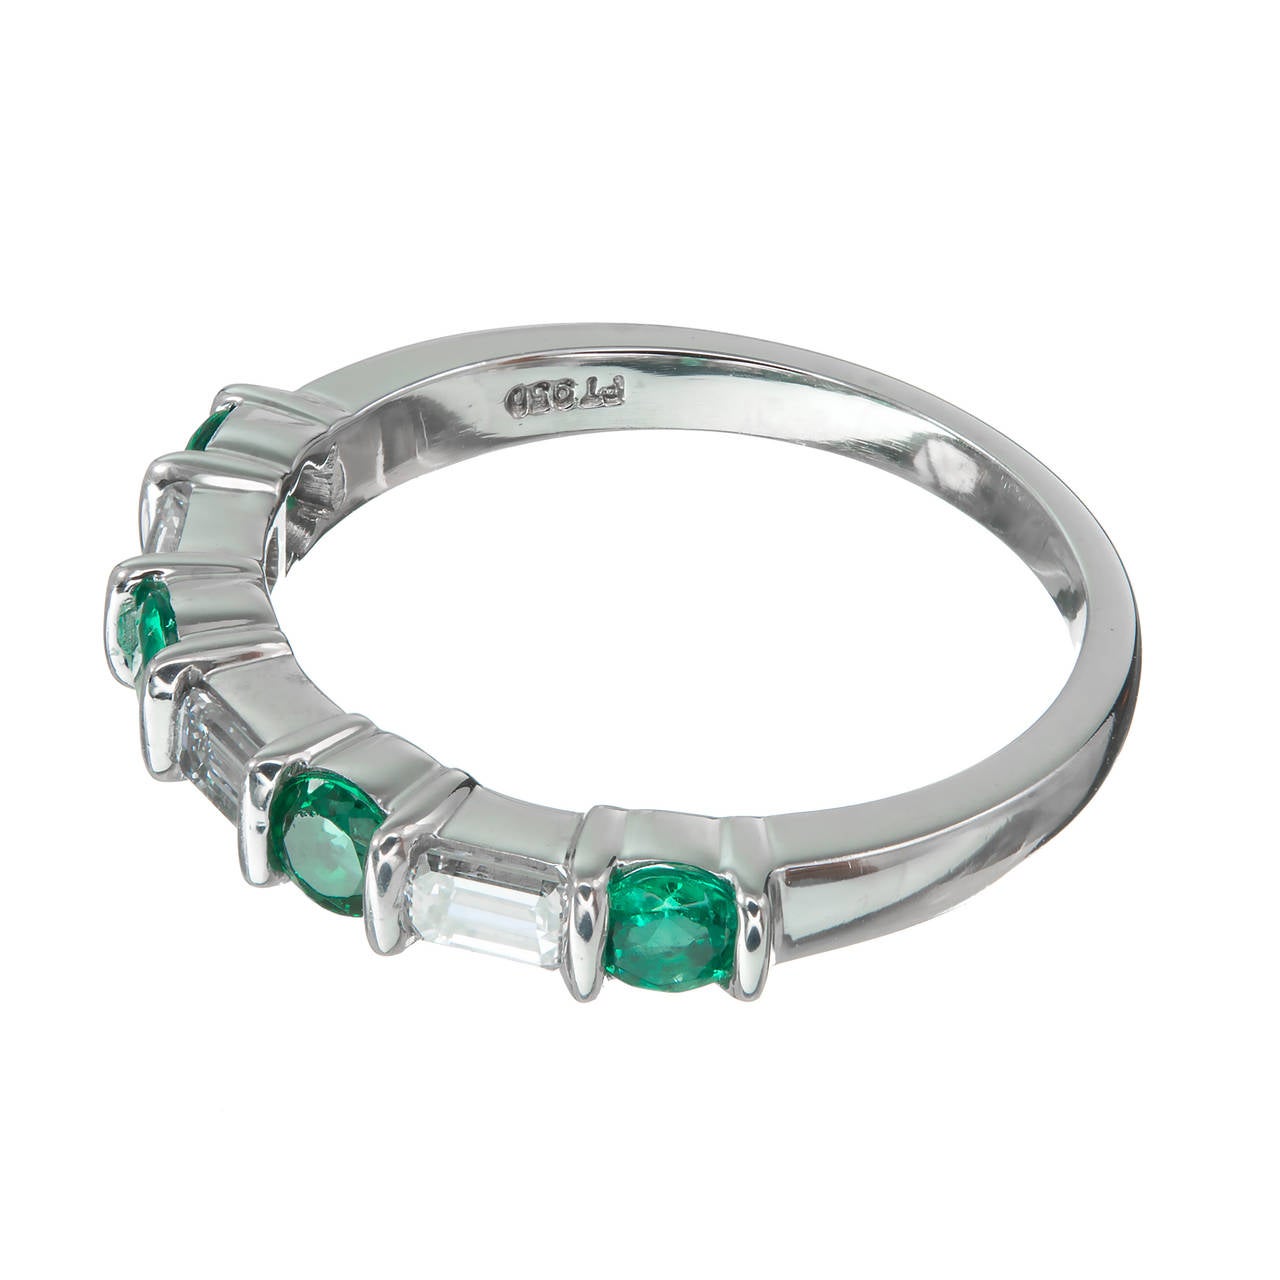 Beautiful vintage 1960’s bar set Tiffany & Co wedding band with correct old deep stamps and top quality gemstones. Shows almost no wear. Everything is well polished and sparkly.

4 round bright green Emeralds, approx. total weight .46cts, VS, 3mm